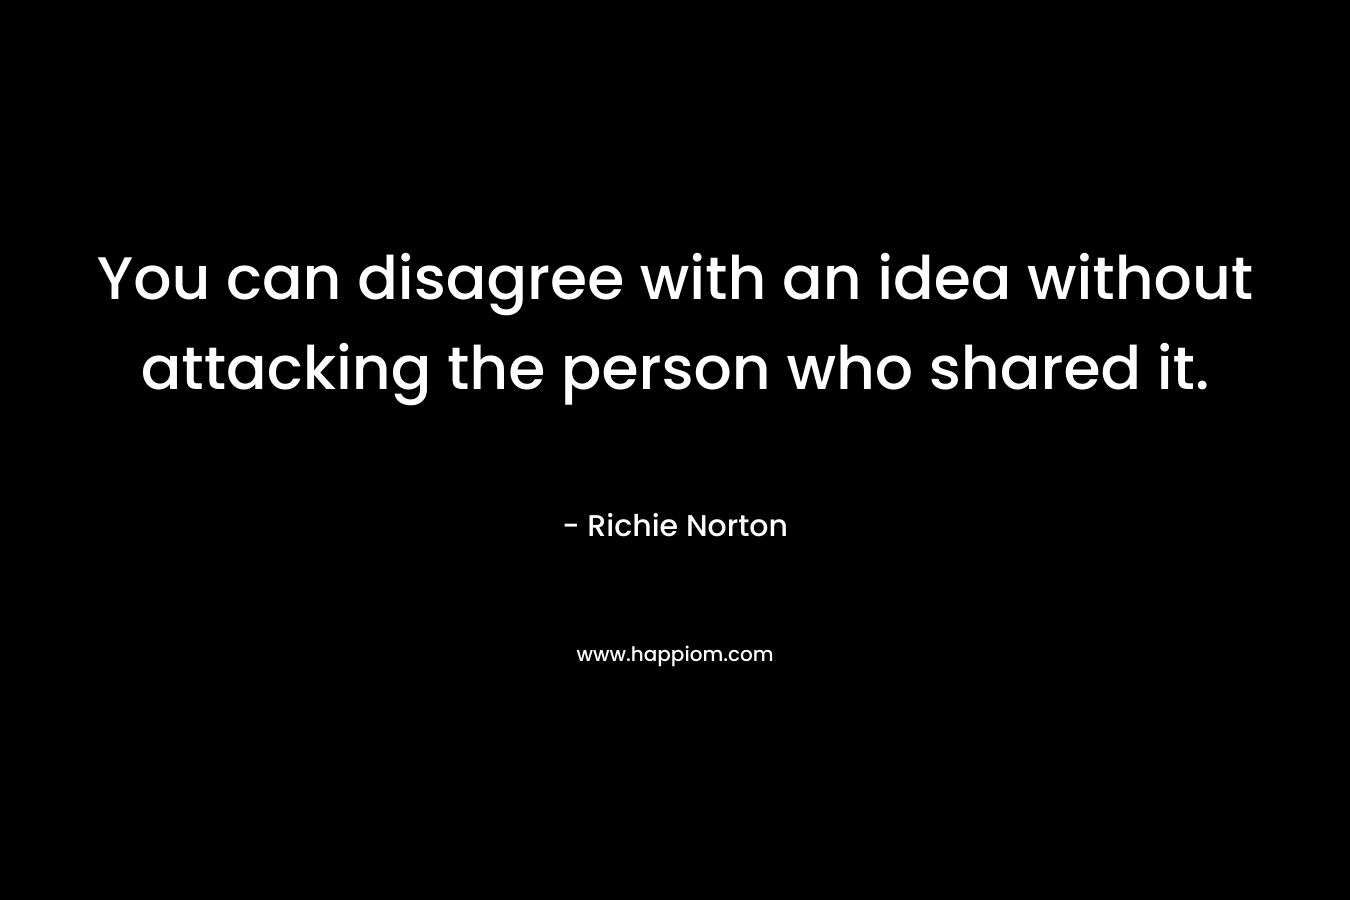 You can disagree with an idea without attacking the person who shared it. – Richie Norton